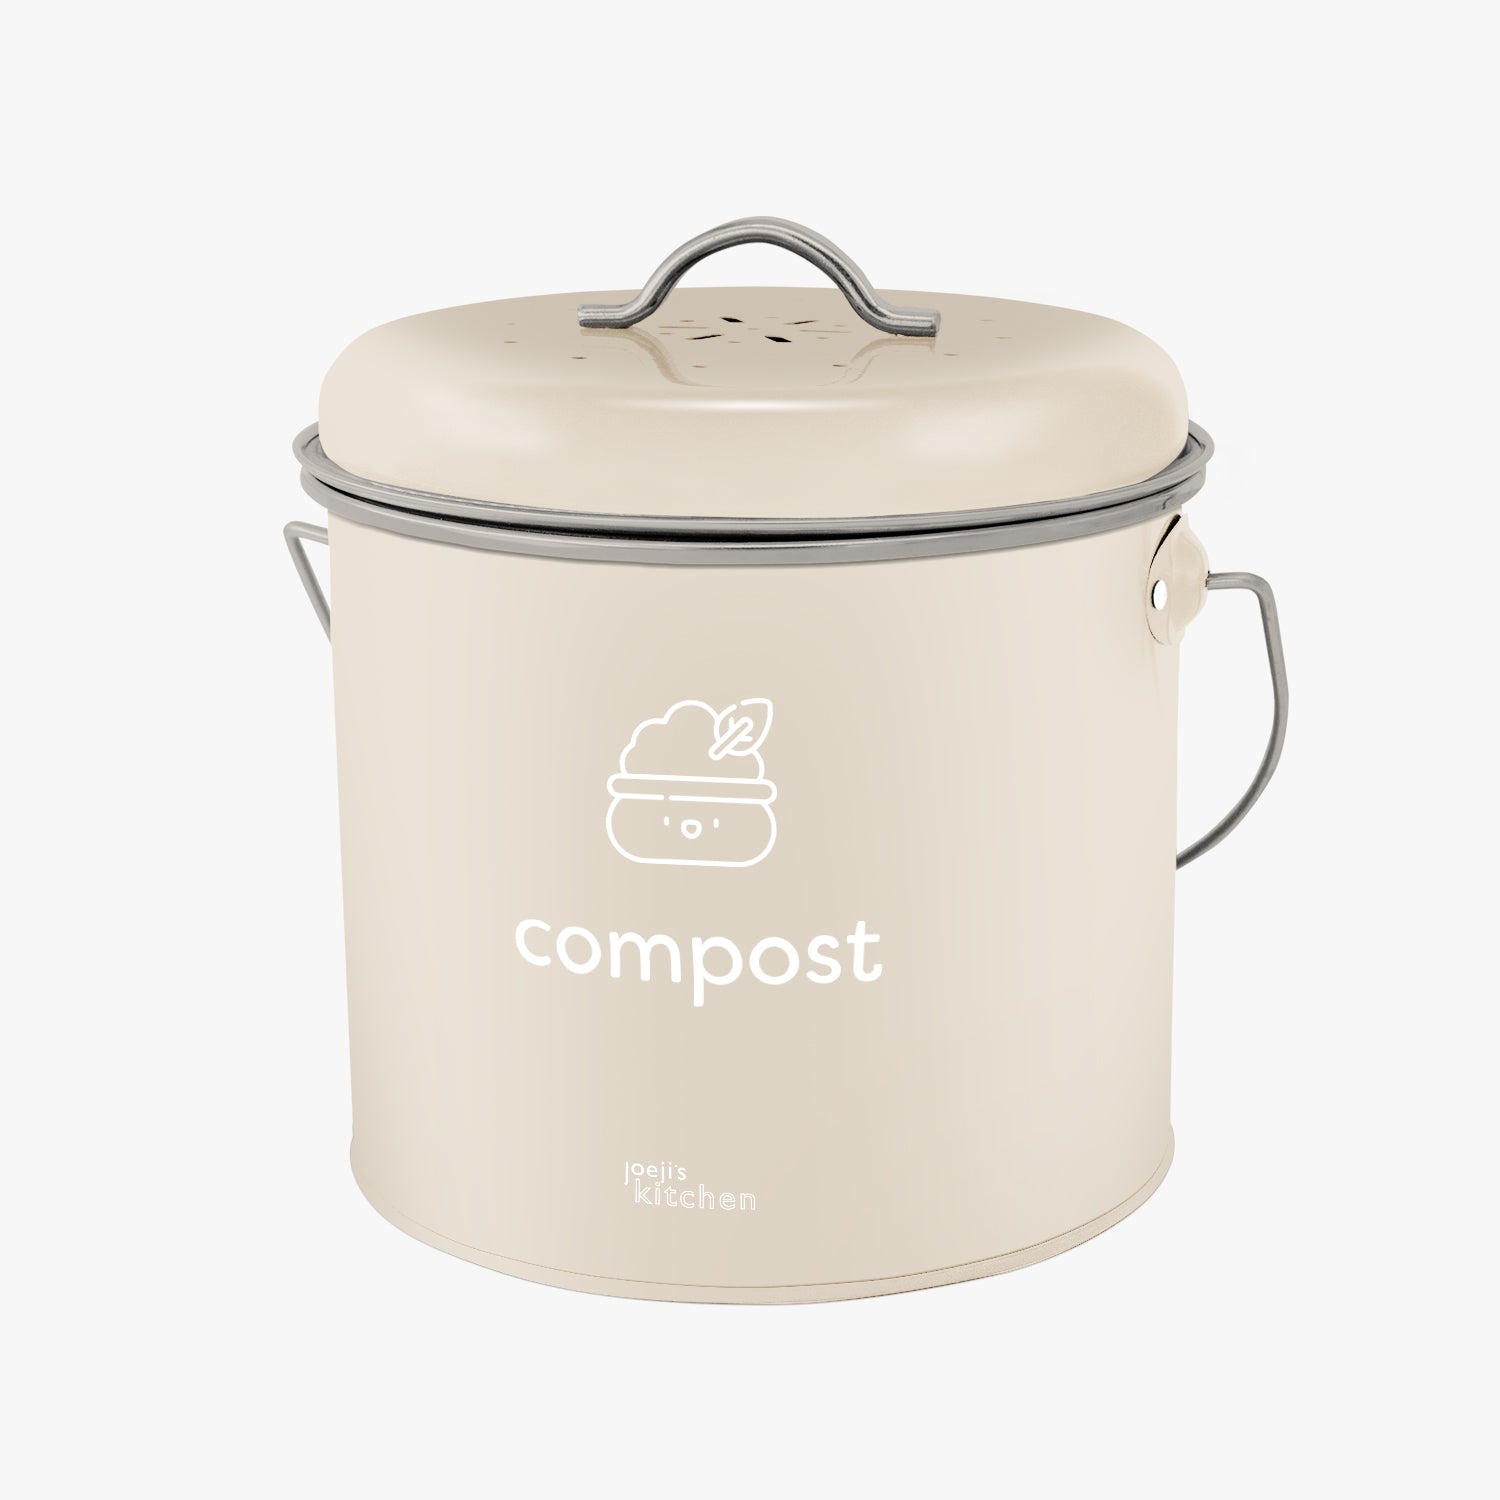 Small Compost Bin Kitchen with Carbon Filters - 3L - Cream